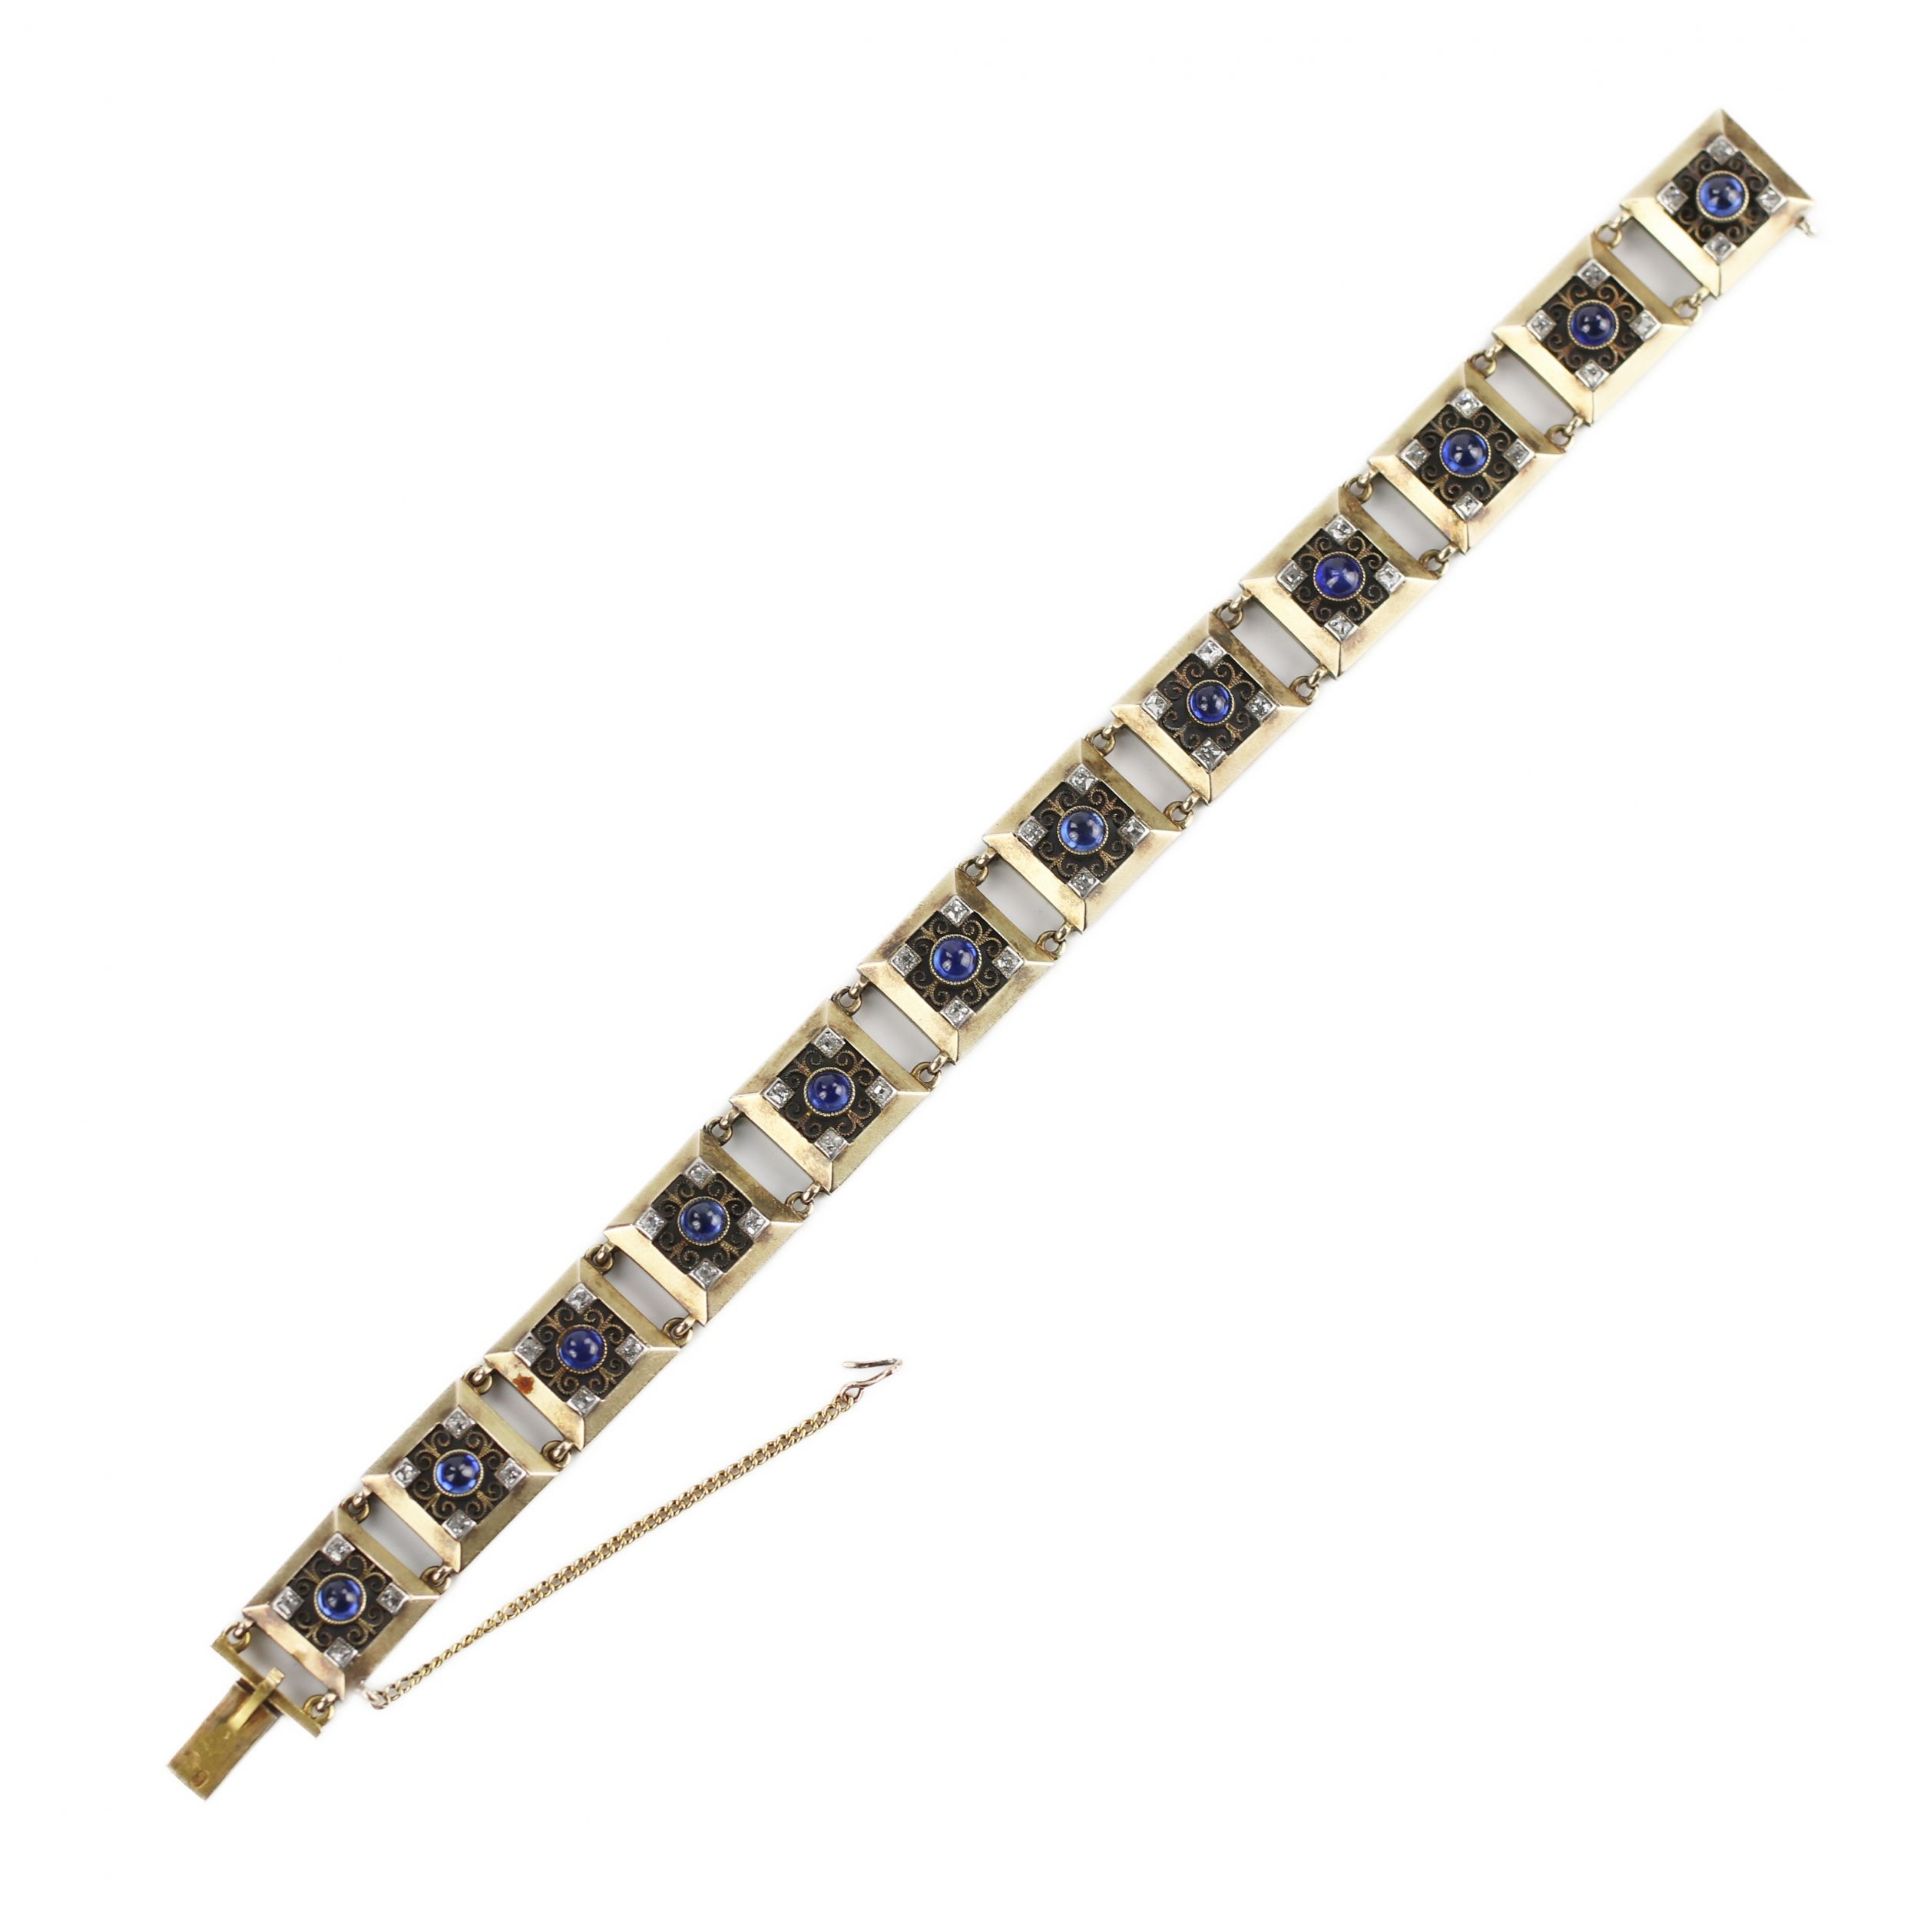 Elegant 56-carat Russian gold bracelet with sapphires and diamonds from Faberge firm. Moscow, Russia - Image 4 of 8